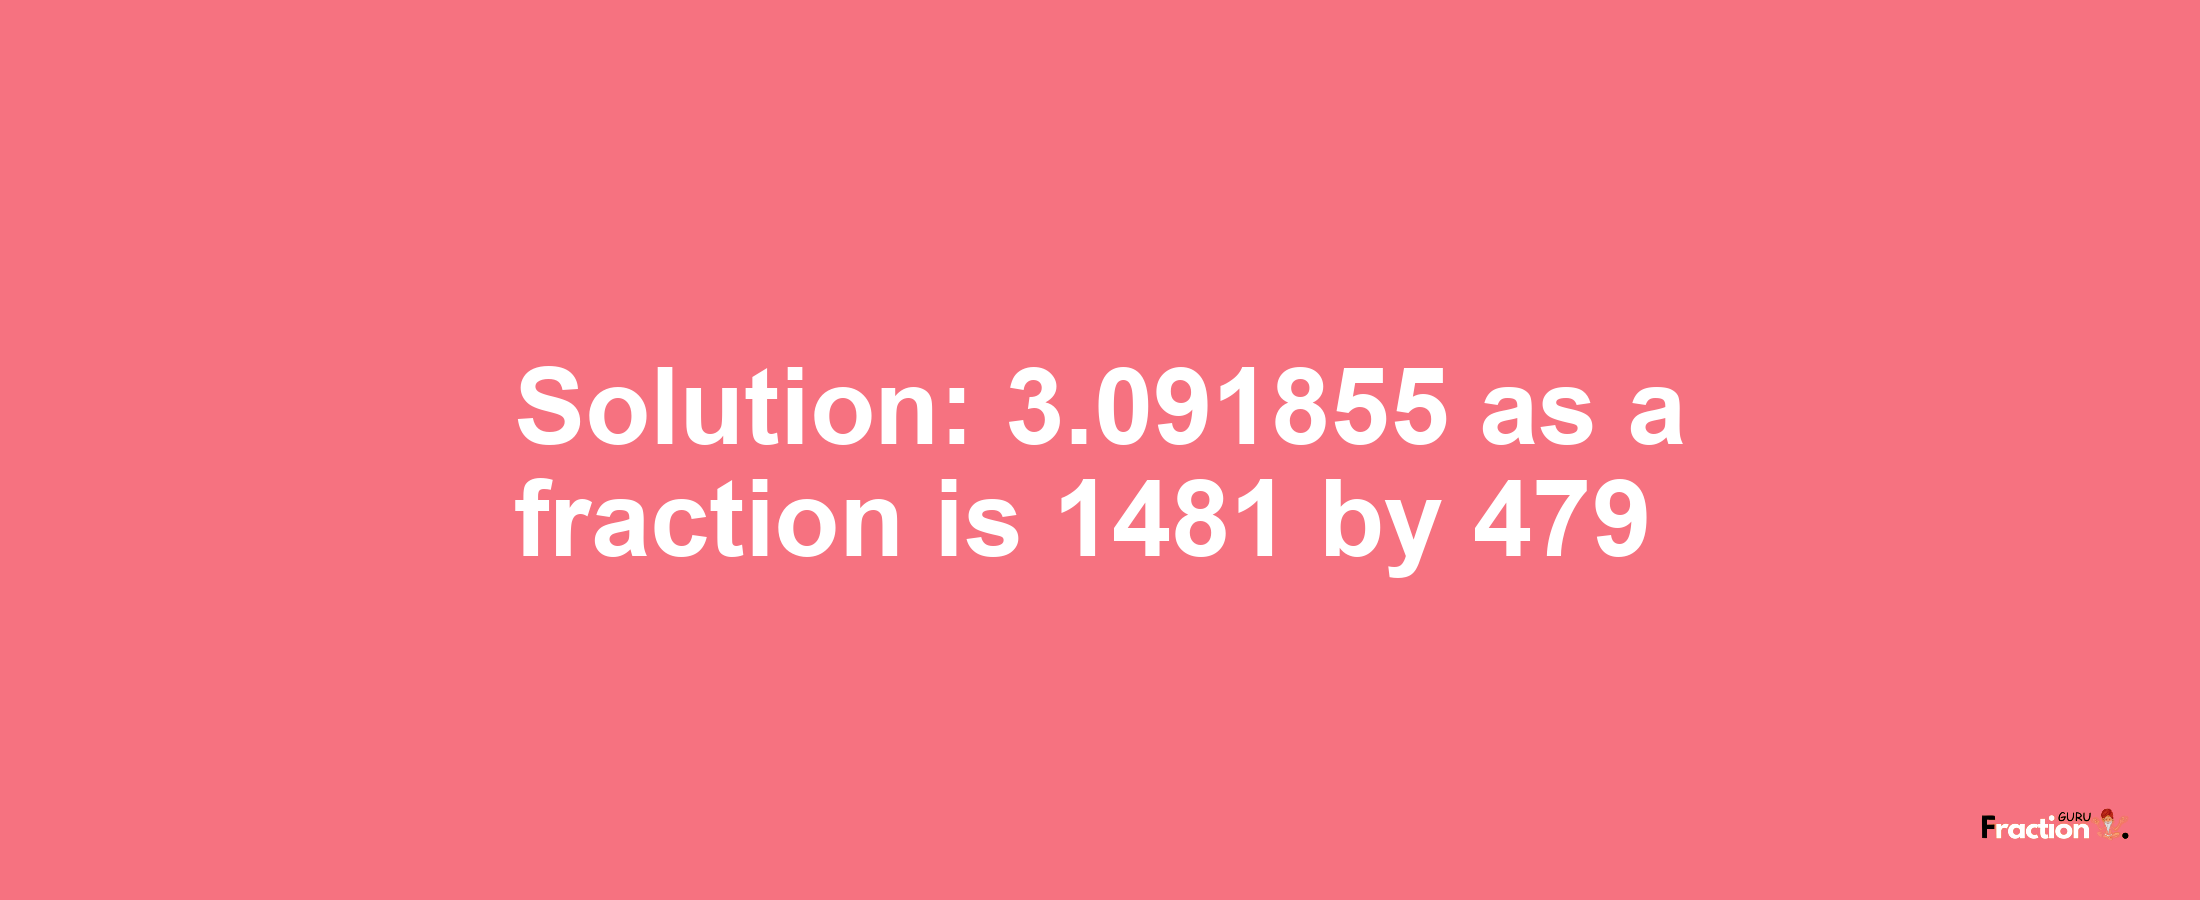 Solution:3.091855 as a fraction is 1481/479